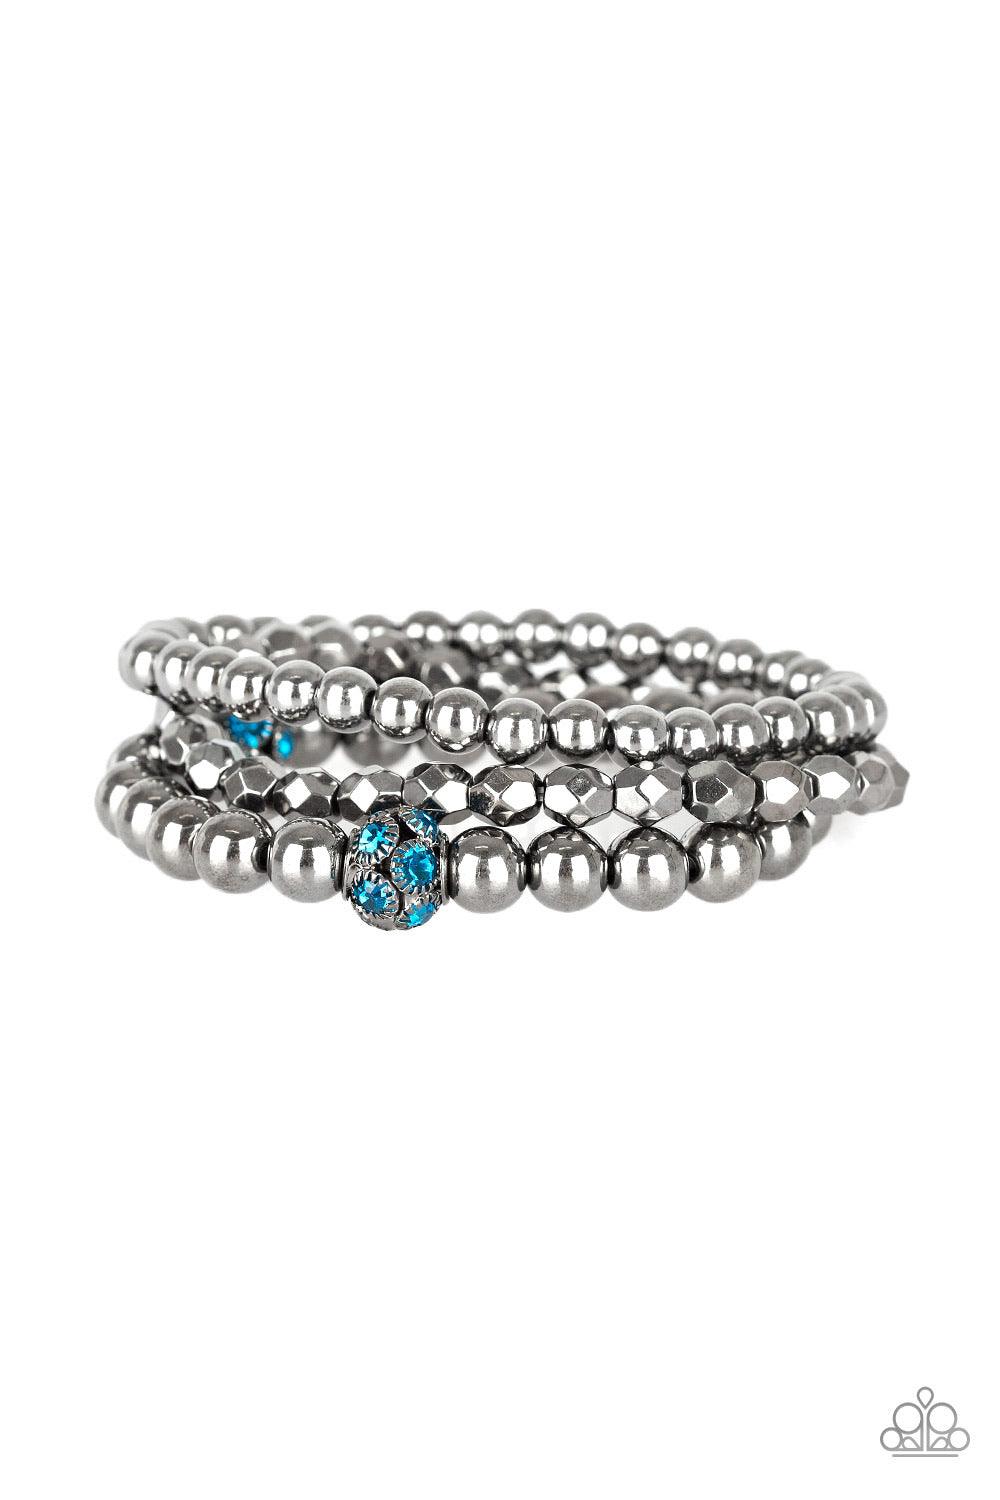 Paparazzi Accessories Noticeably Noir - Blue Mismatched gunmetal beads and blue rhinestone encrusted beads are threaded along stretchy bands for an edgy and refined look. Sold as one set of three bracelets. Jewelry